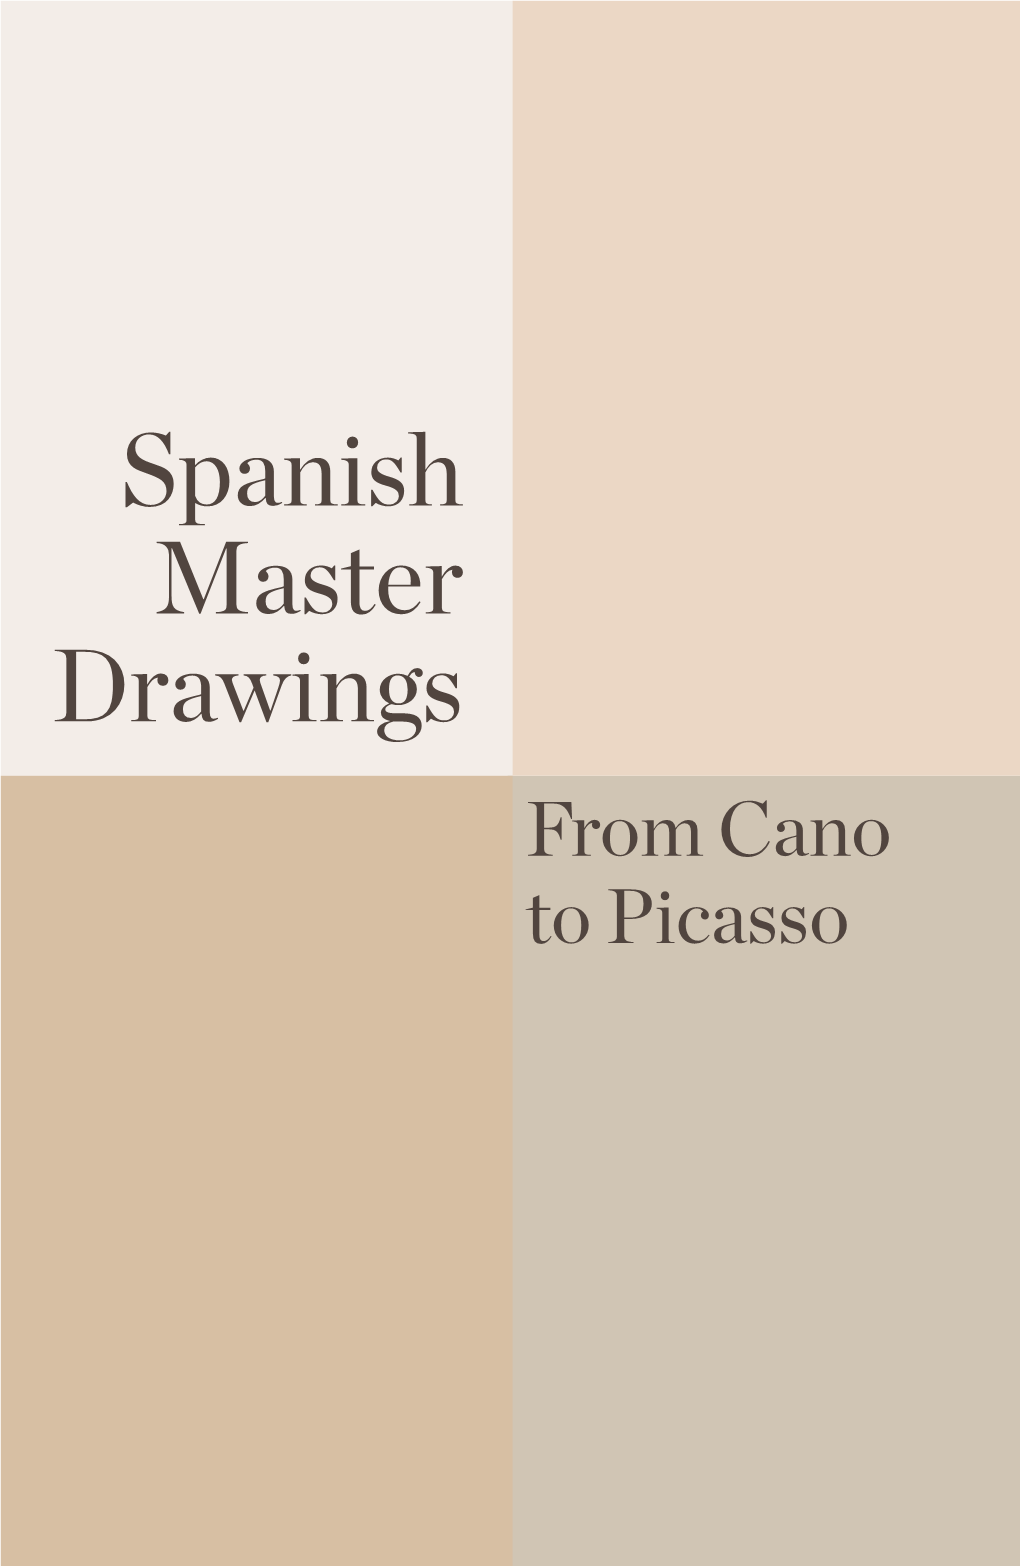 Spanish Master Drawings from Cano to Picasso